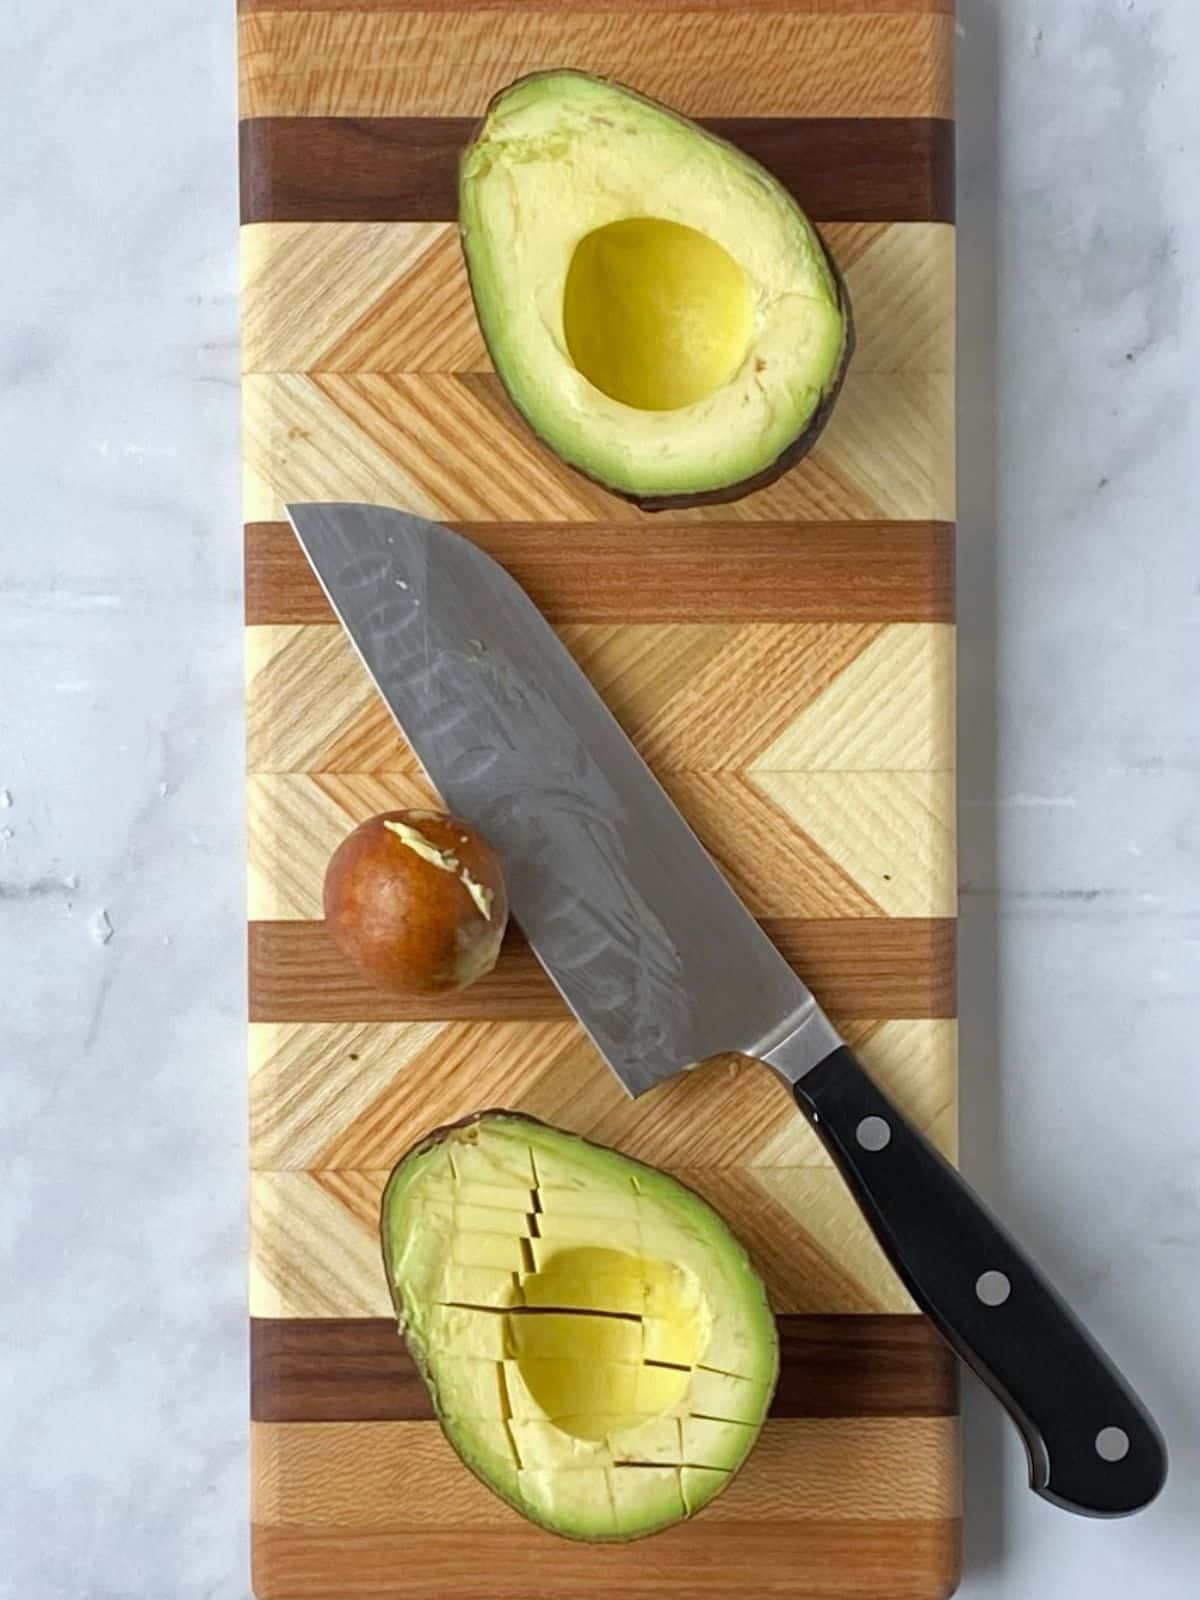 Avocado sliced in half and pit removed.